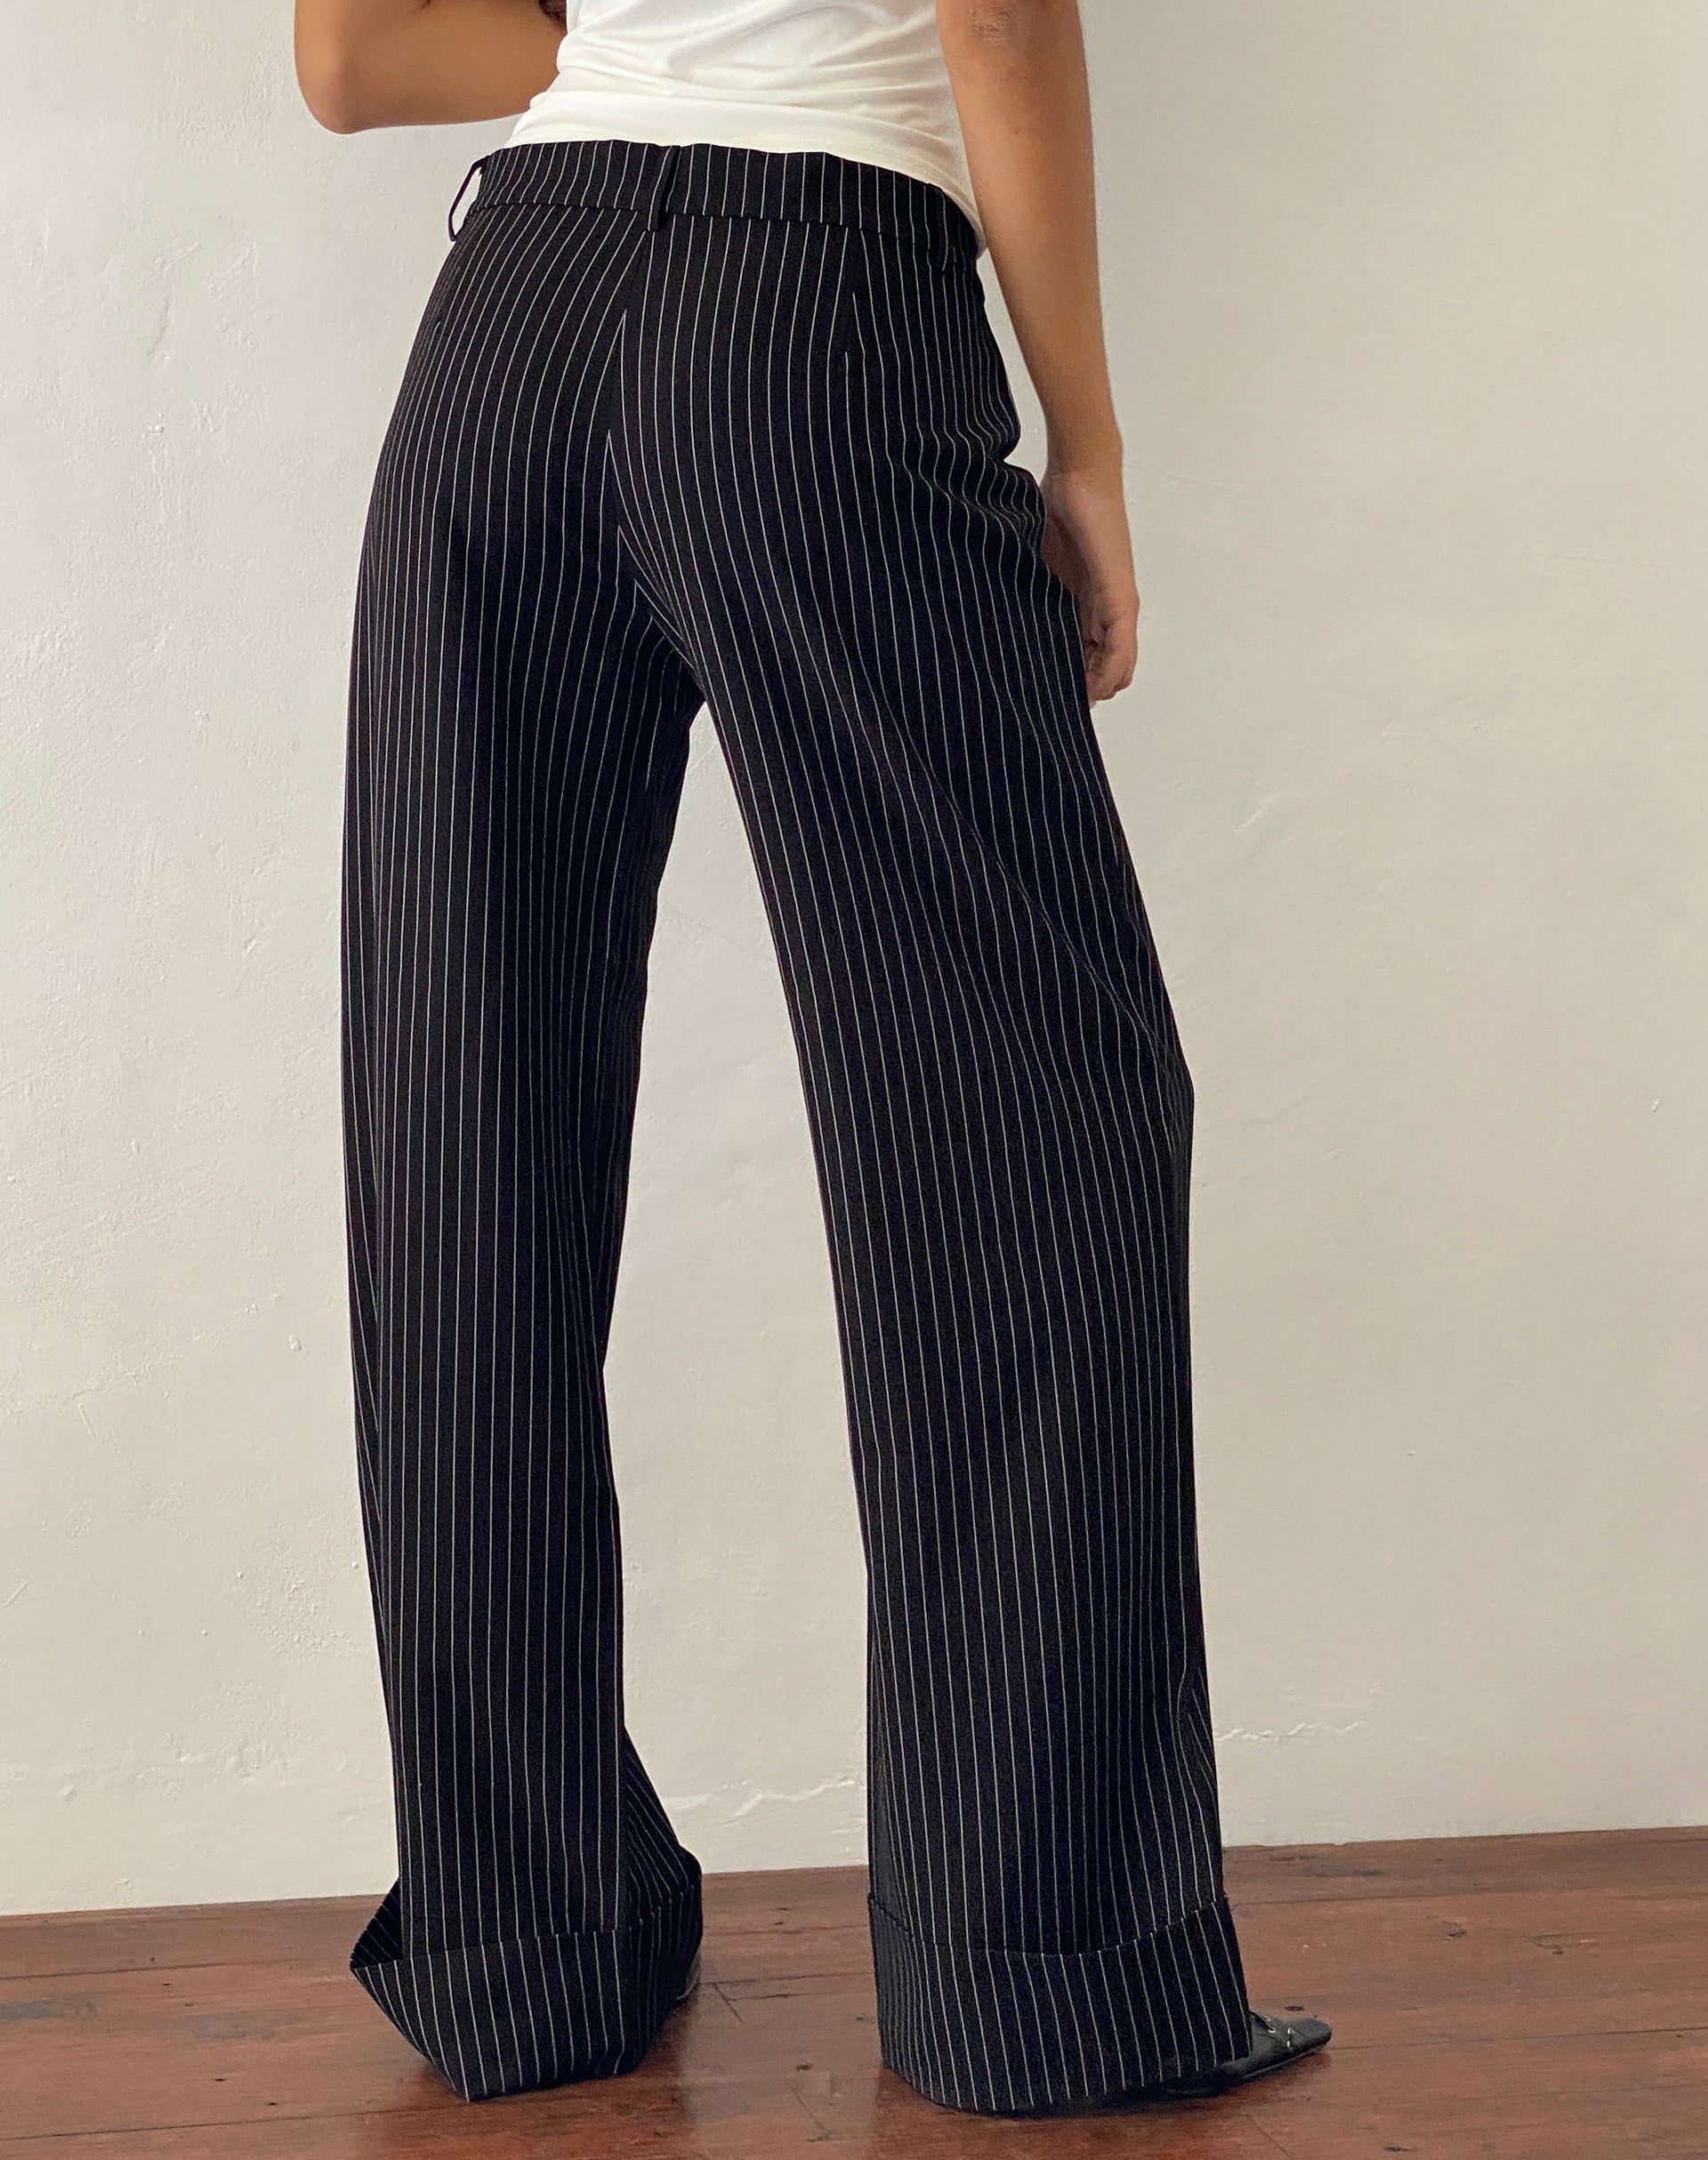 Image of Abba Low Rise Trouser in Black Pinstripe Tailoring